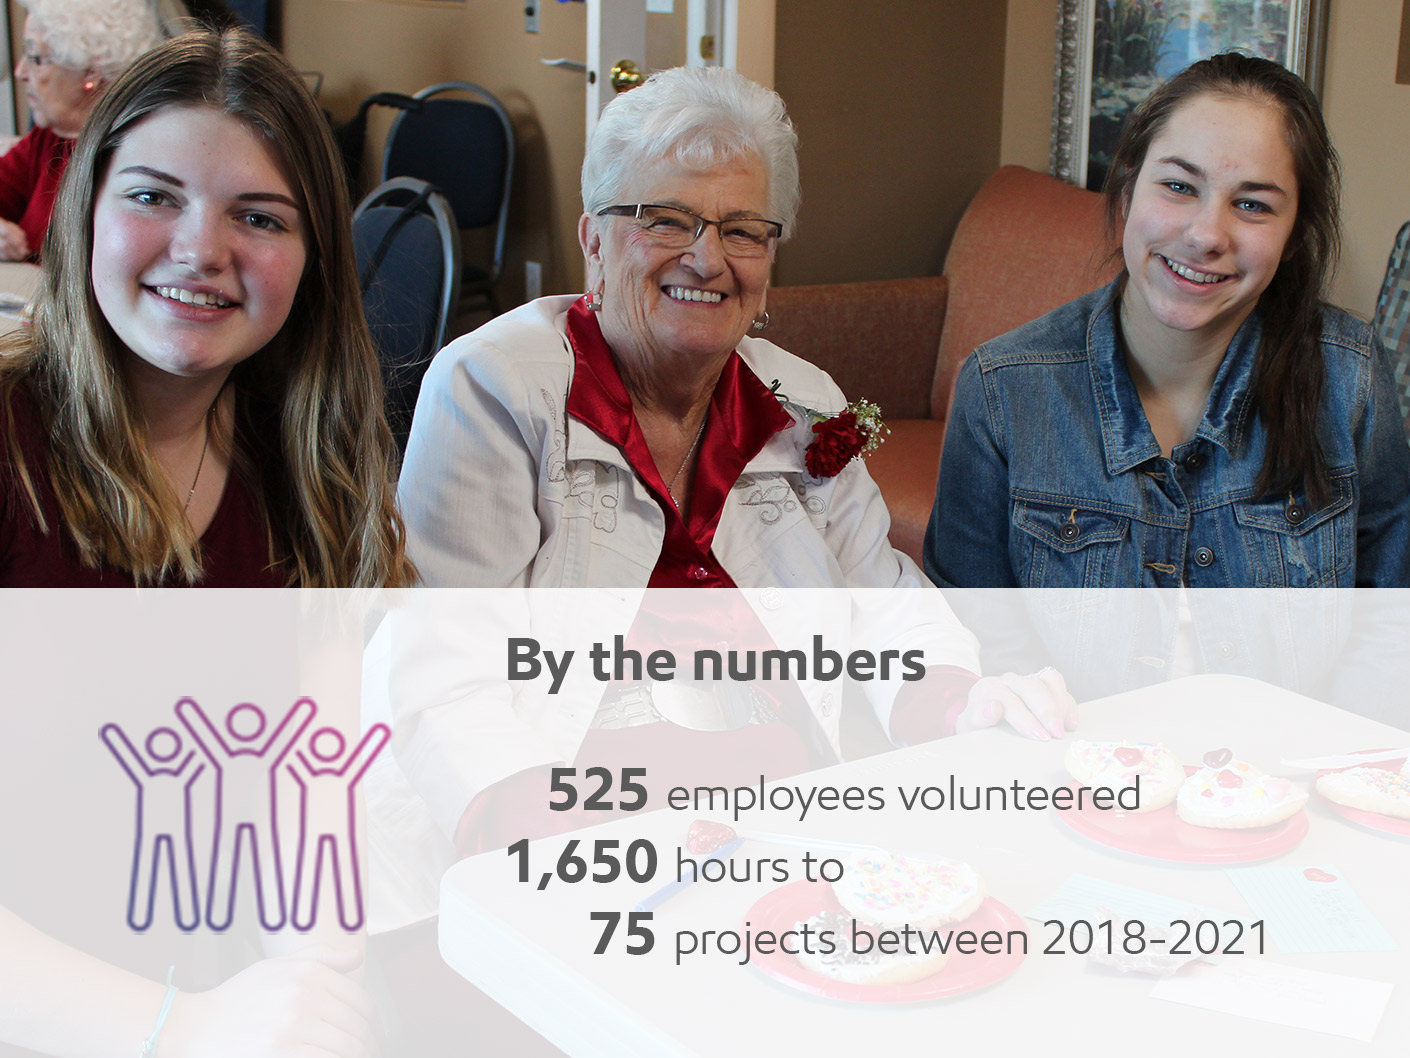 senior with two young women enjoying desserts includes community volunteer hours of 1,650 by 525 employees between 2018 and 2021